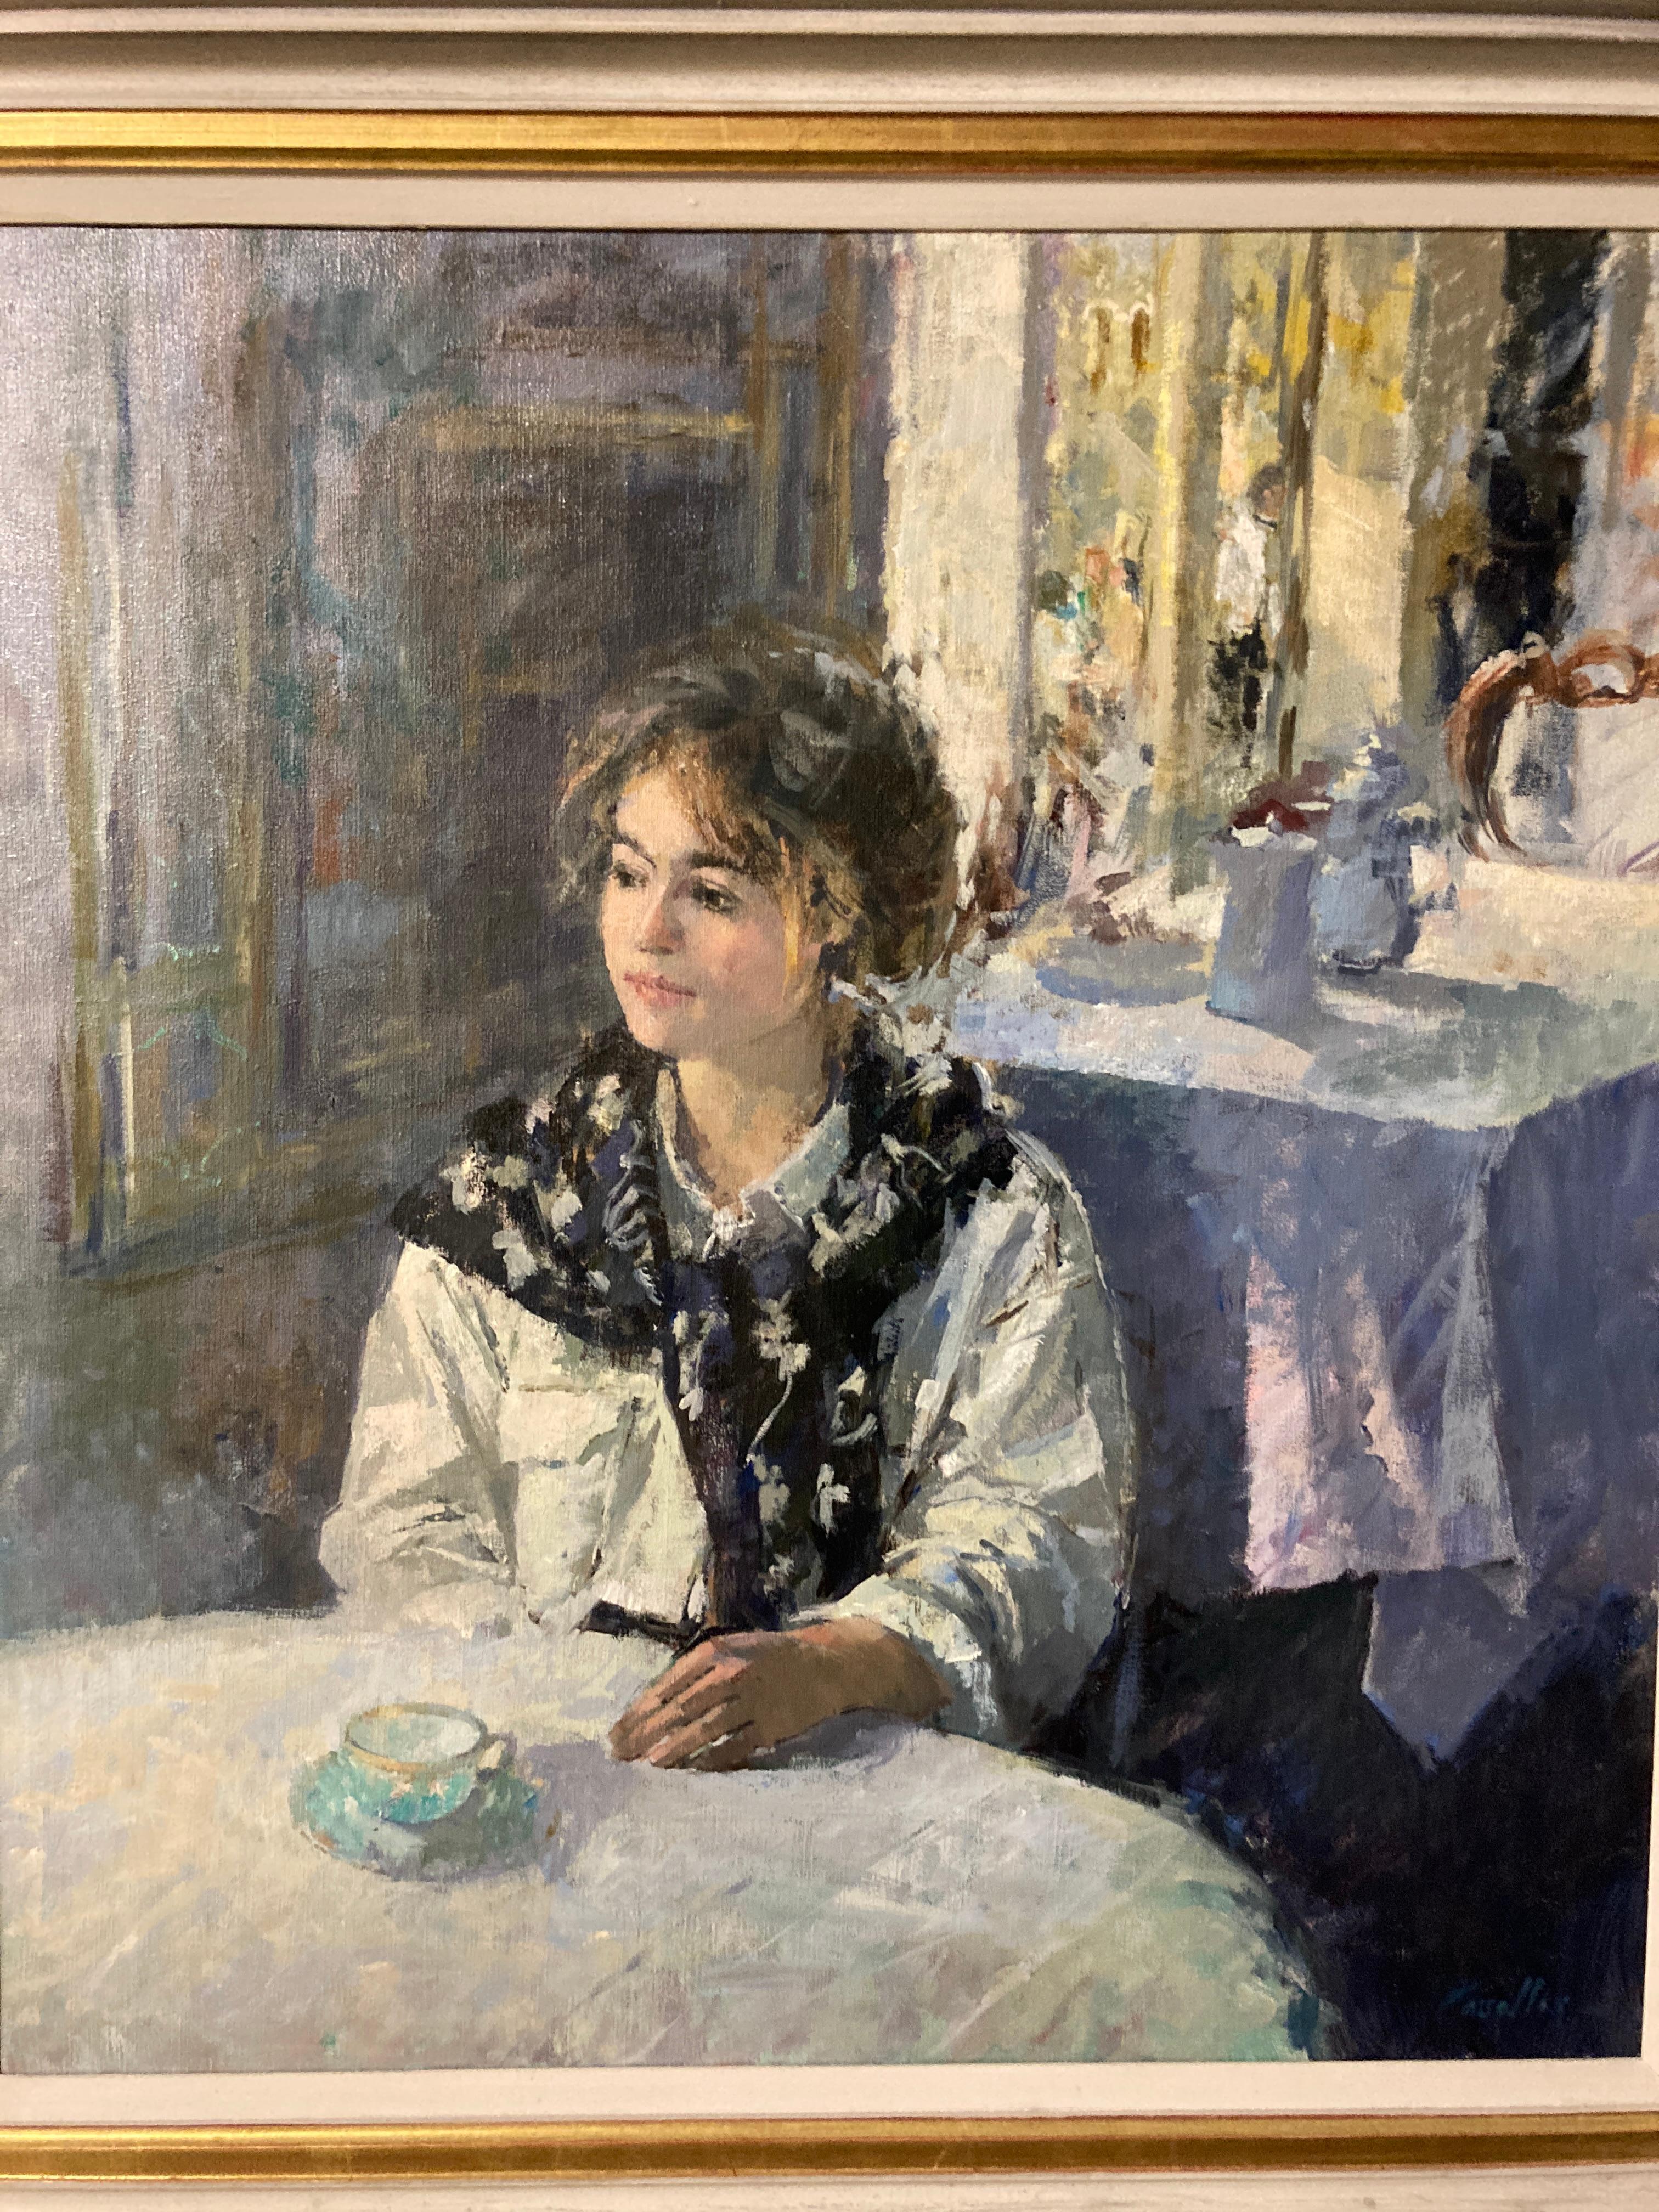 Original Oil Painting by Jane Corsellis ( born 1940)
'Waiting at Florian's, Venice'
On Canvas
26